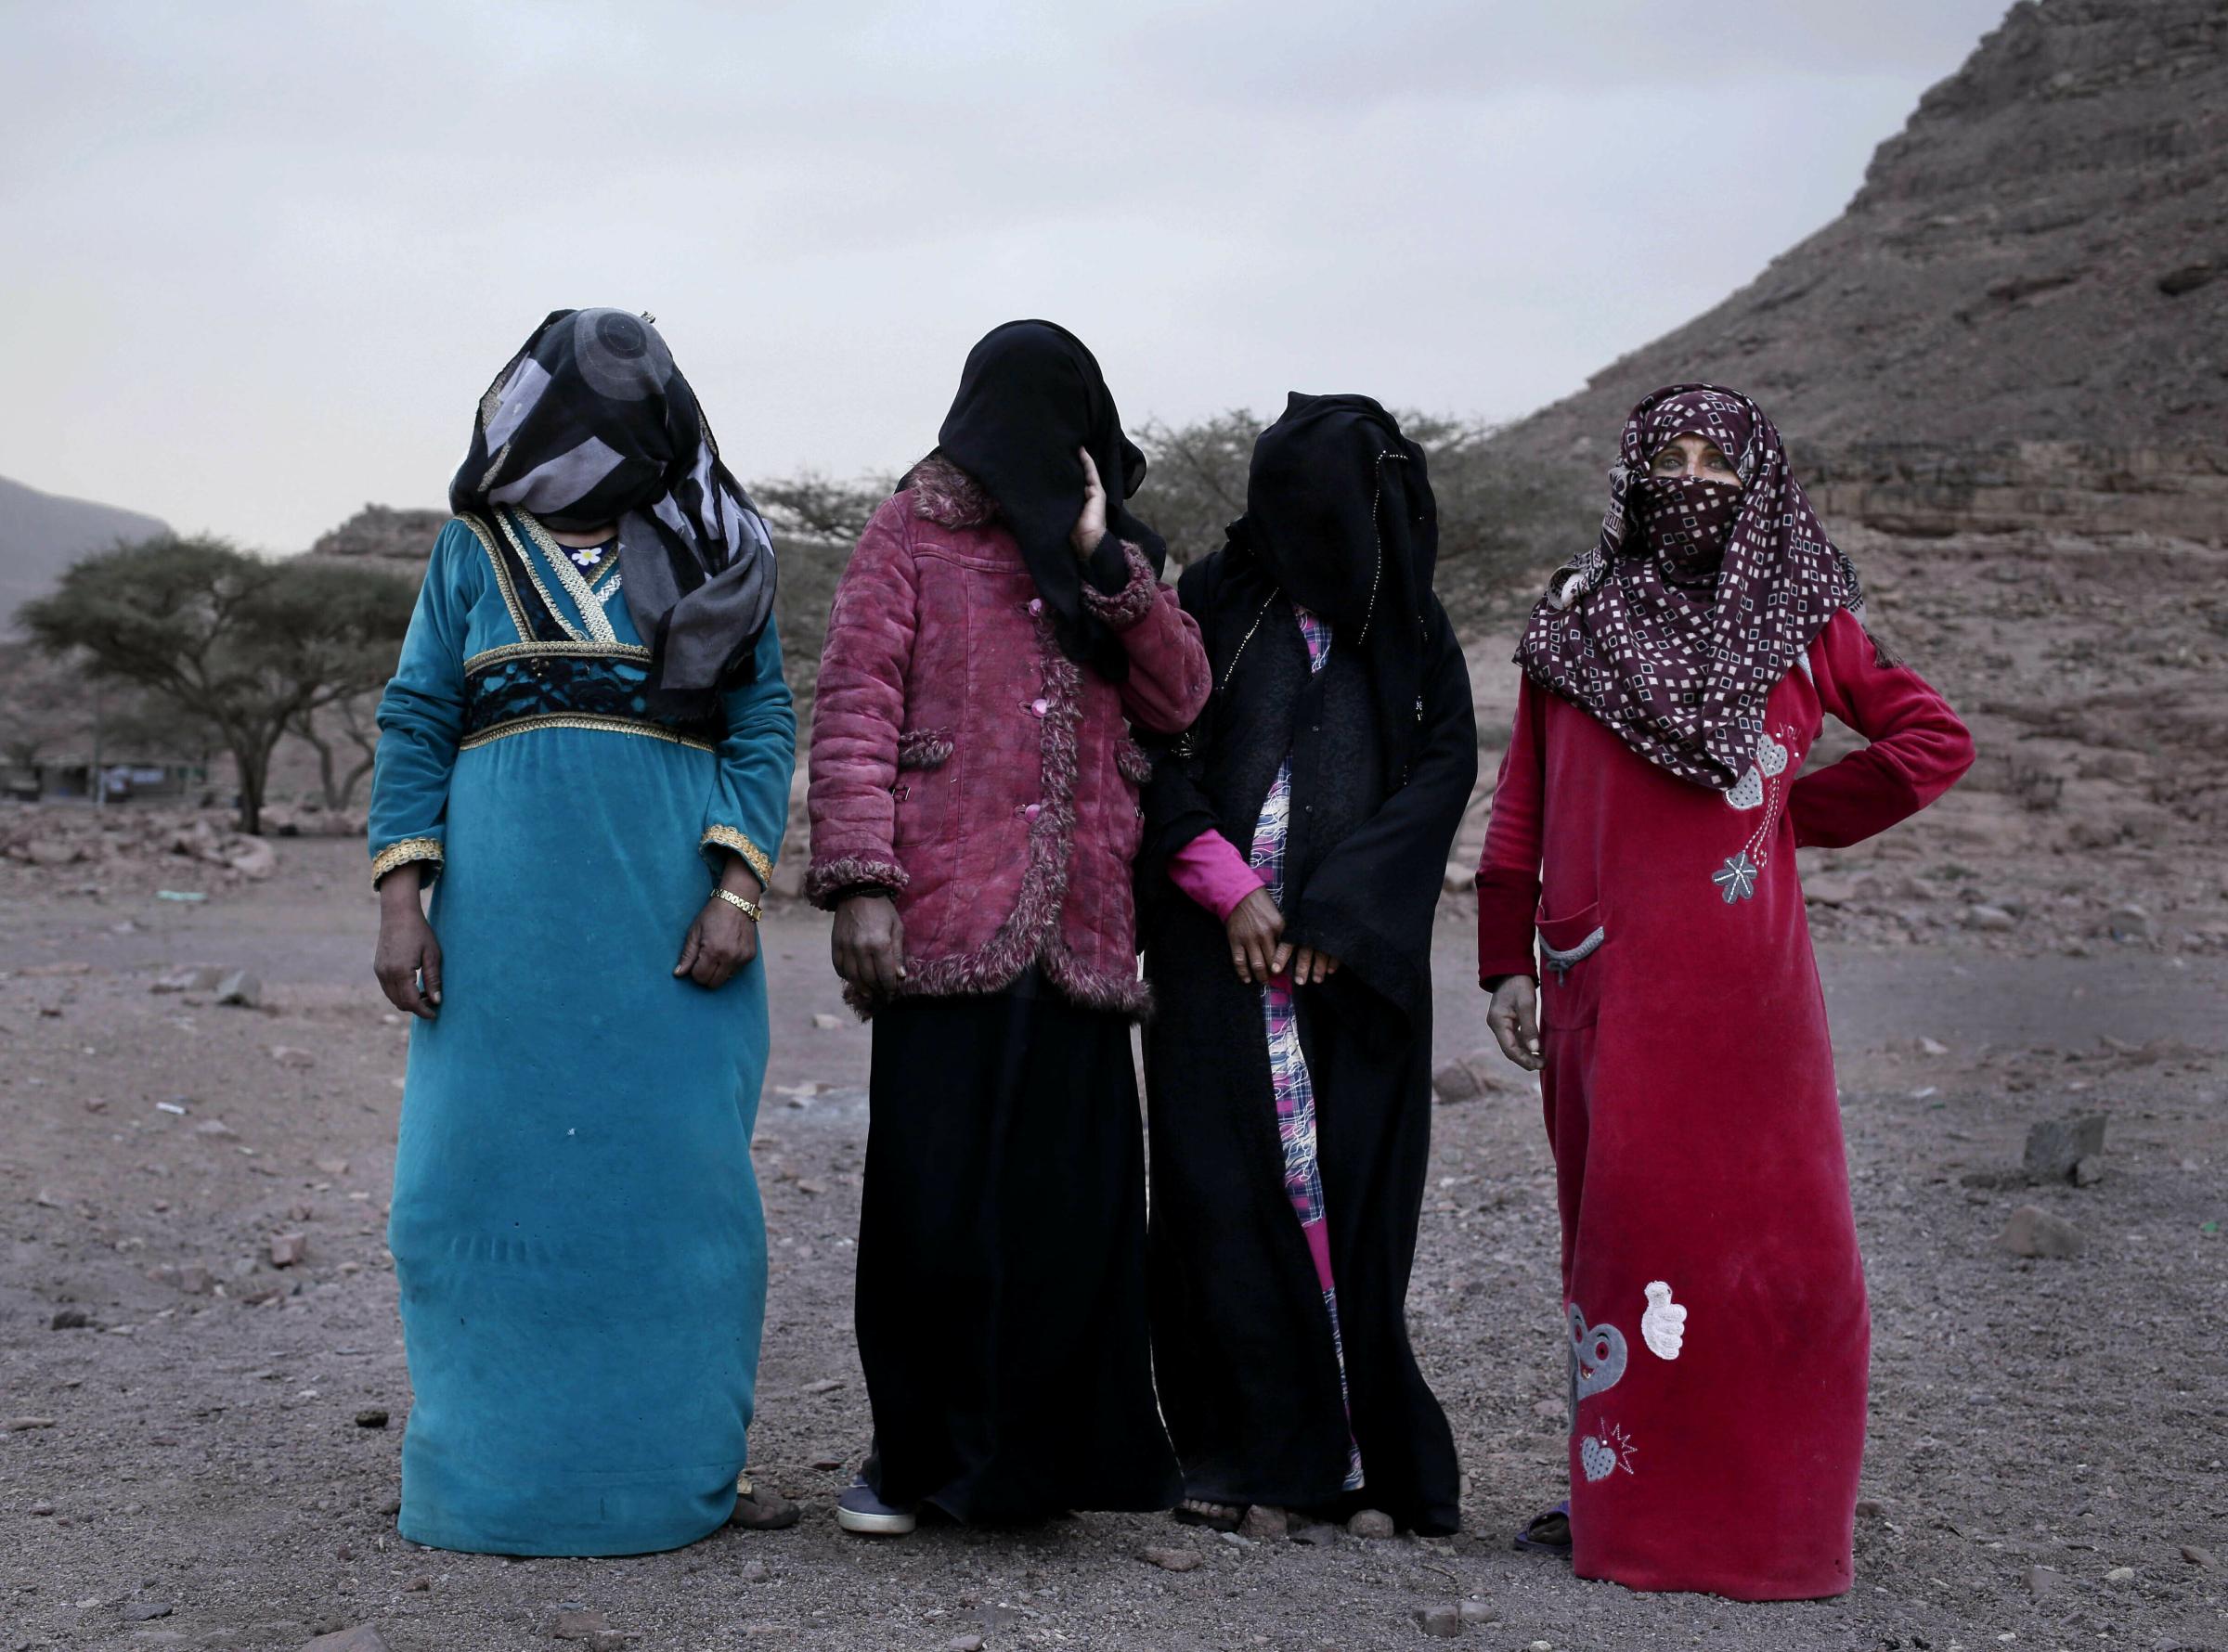 The first female Bedouin guides Umm Yasser, Umm Soliman, Aicha, and Selima.